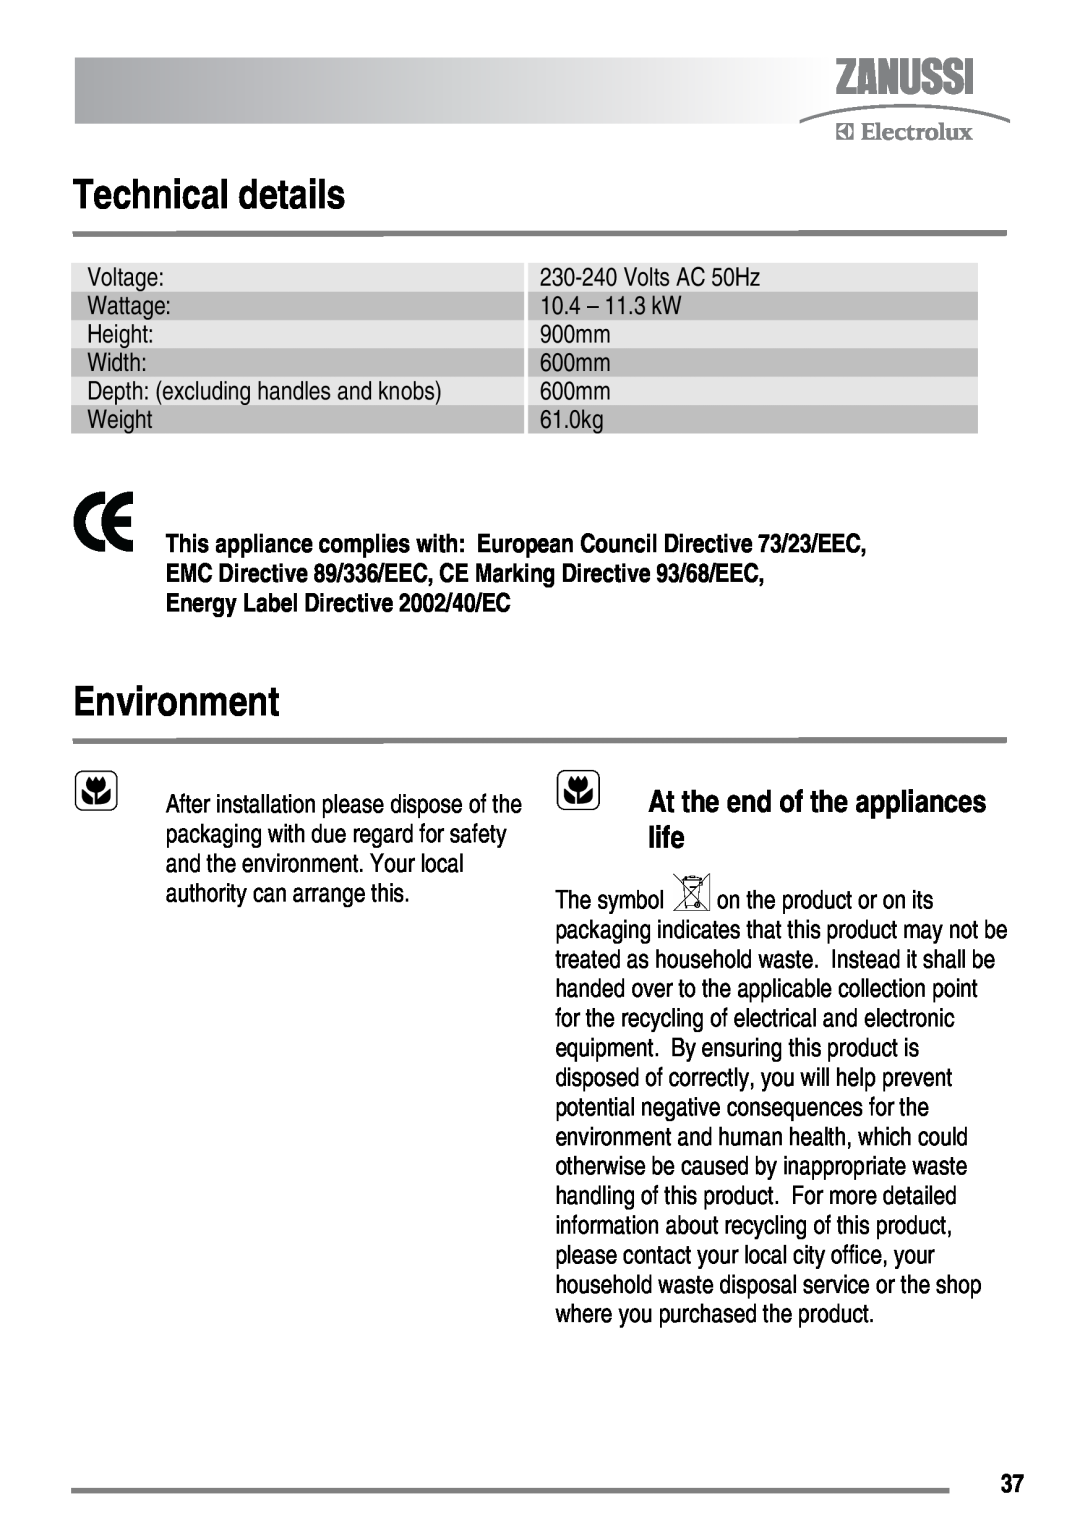 Zanussi ZKT6050 user manual Technical details, Environment, At the end of the appliances life 